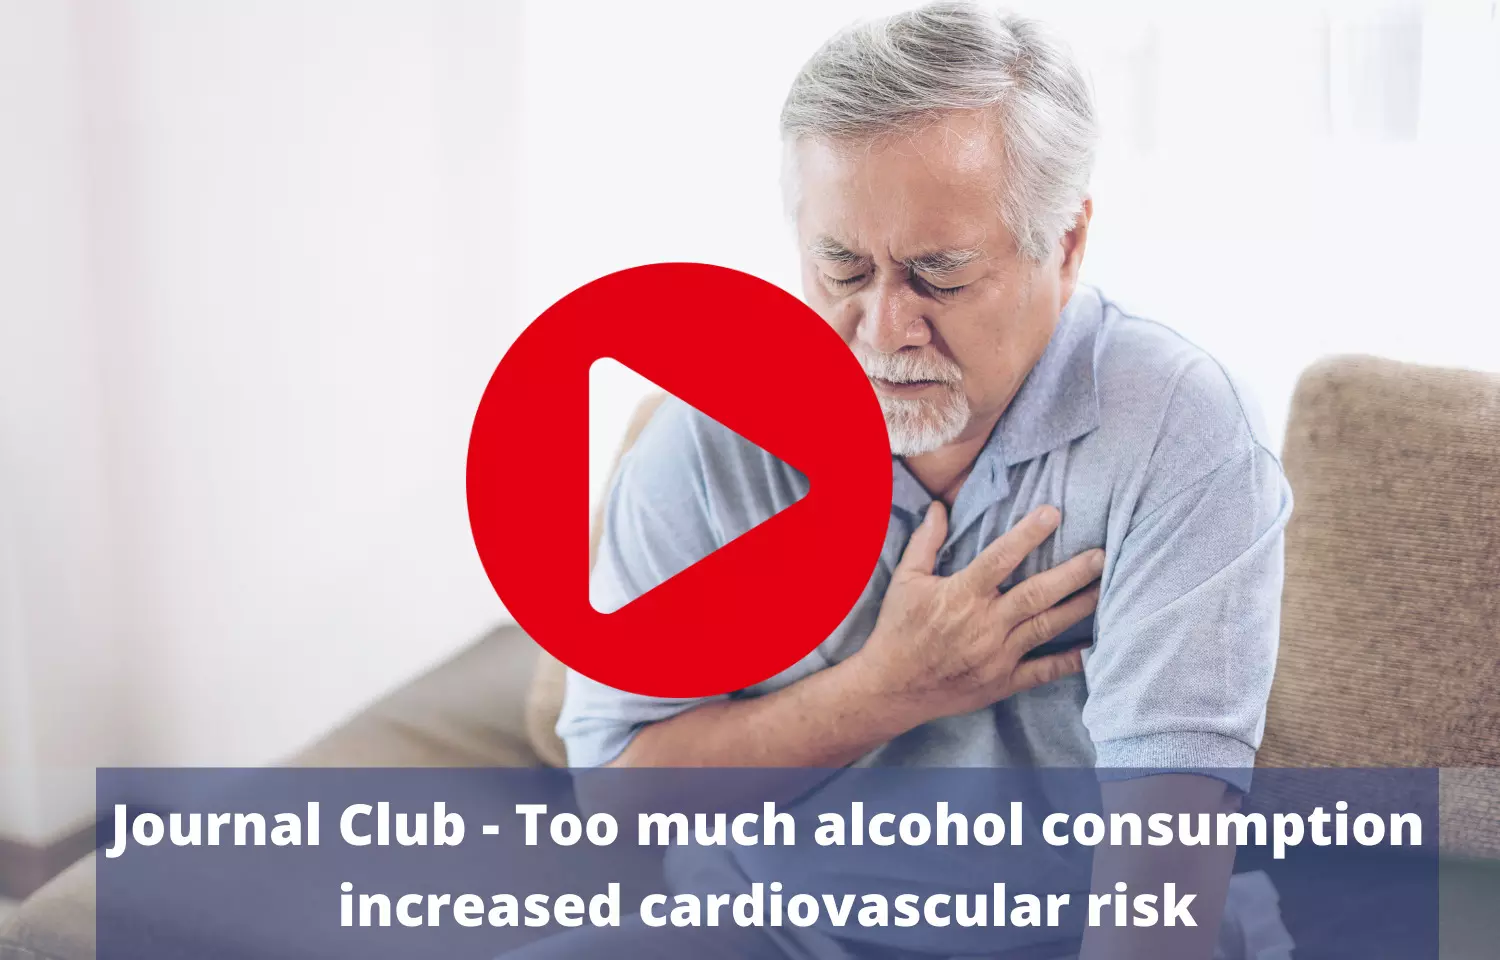 Journal Club - Too much alcohol consumption increased cardiovascular risk